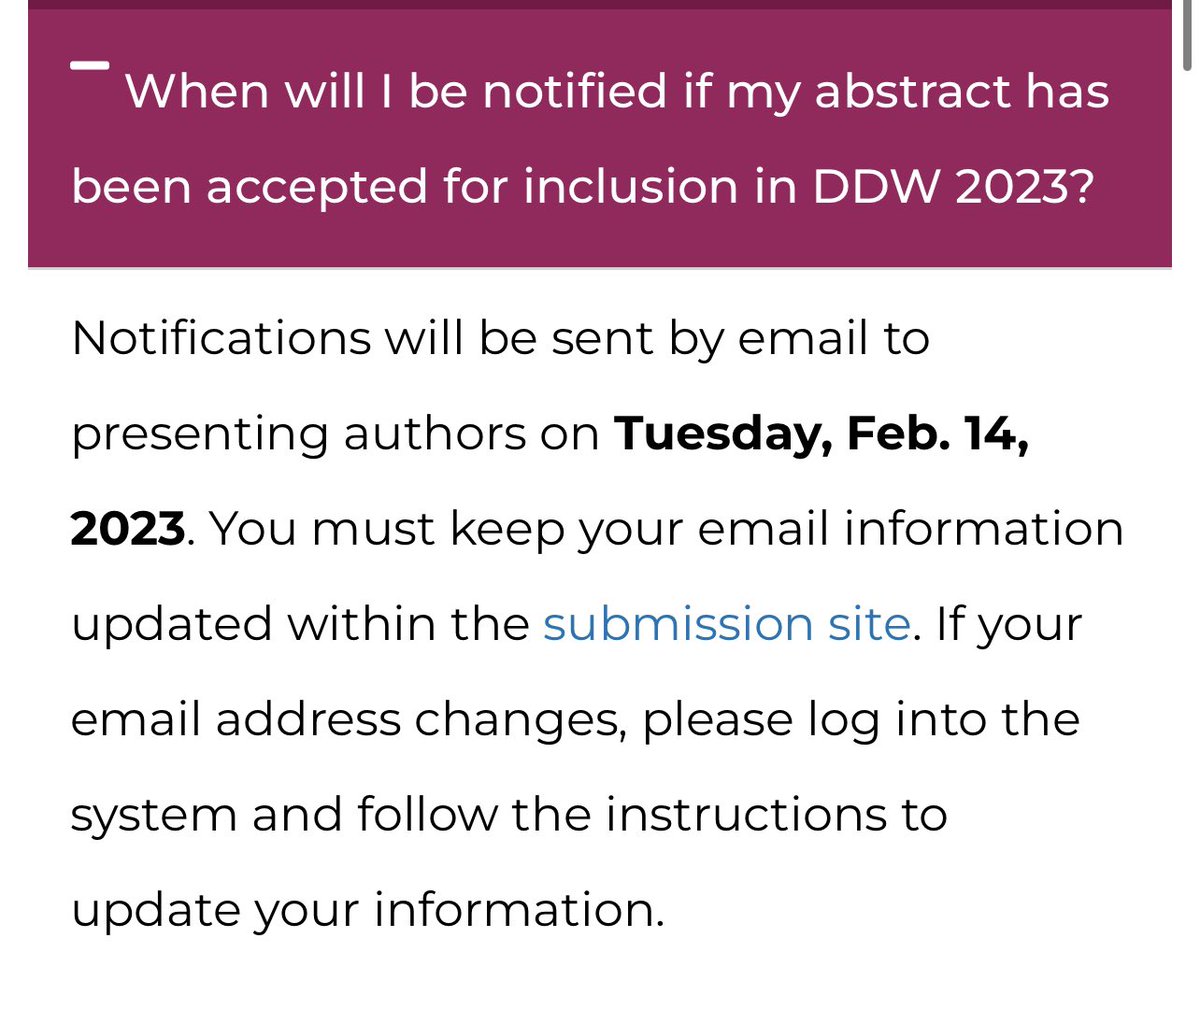 ⌛️Good luck to everyone who submitted a DDW abstract and look forward for us all to meet once again soon! 🗓️
#DDW2023 @DDWMeeting @AmCollegeGastro @AASLDtweets @AASLDFoundation @AmerGastroAssn @Medtronic @blackingastro @WomeninEndo